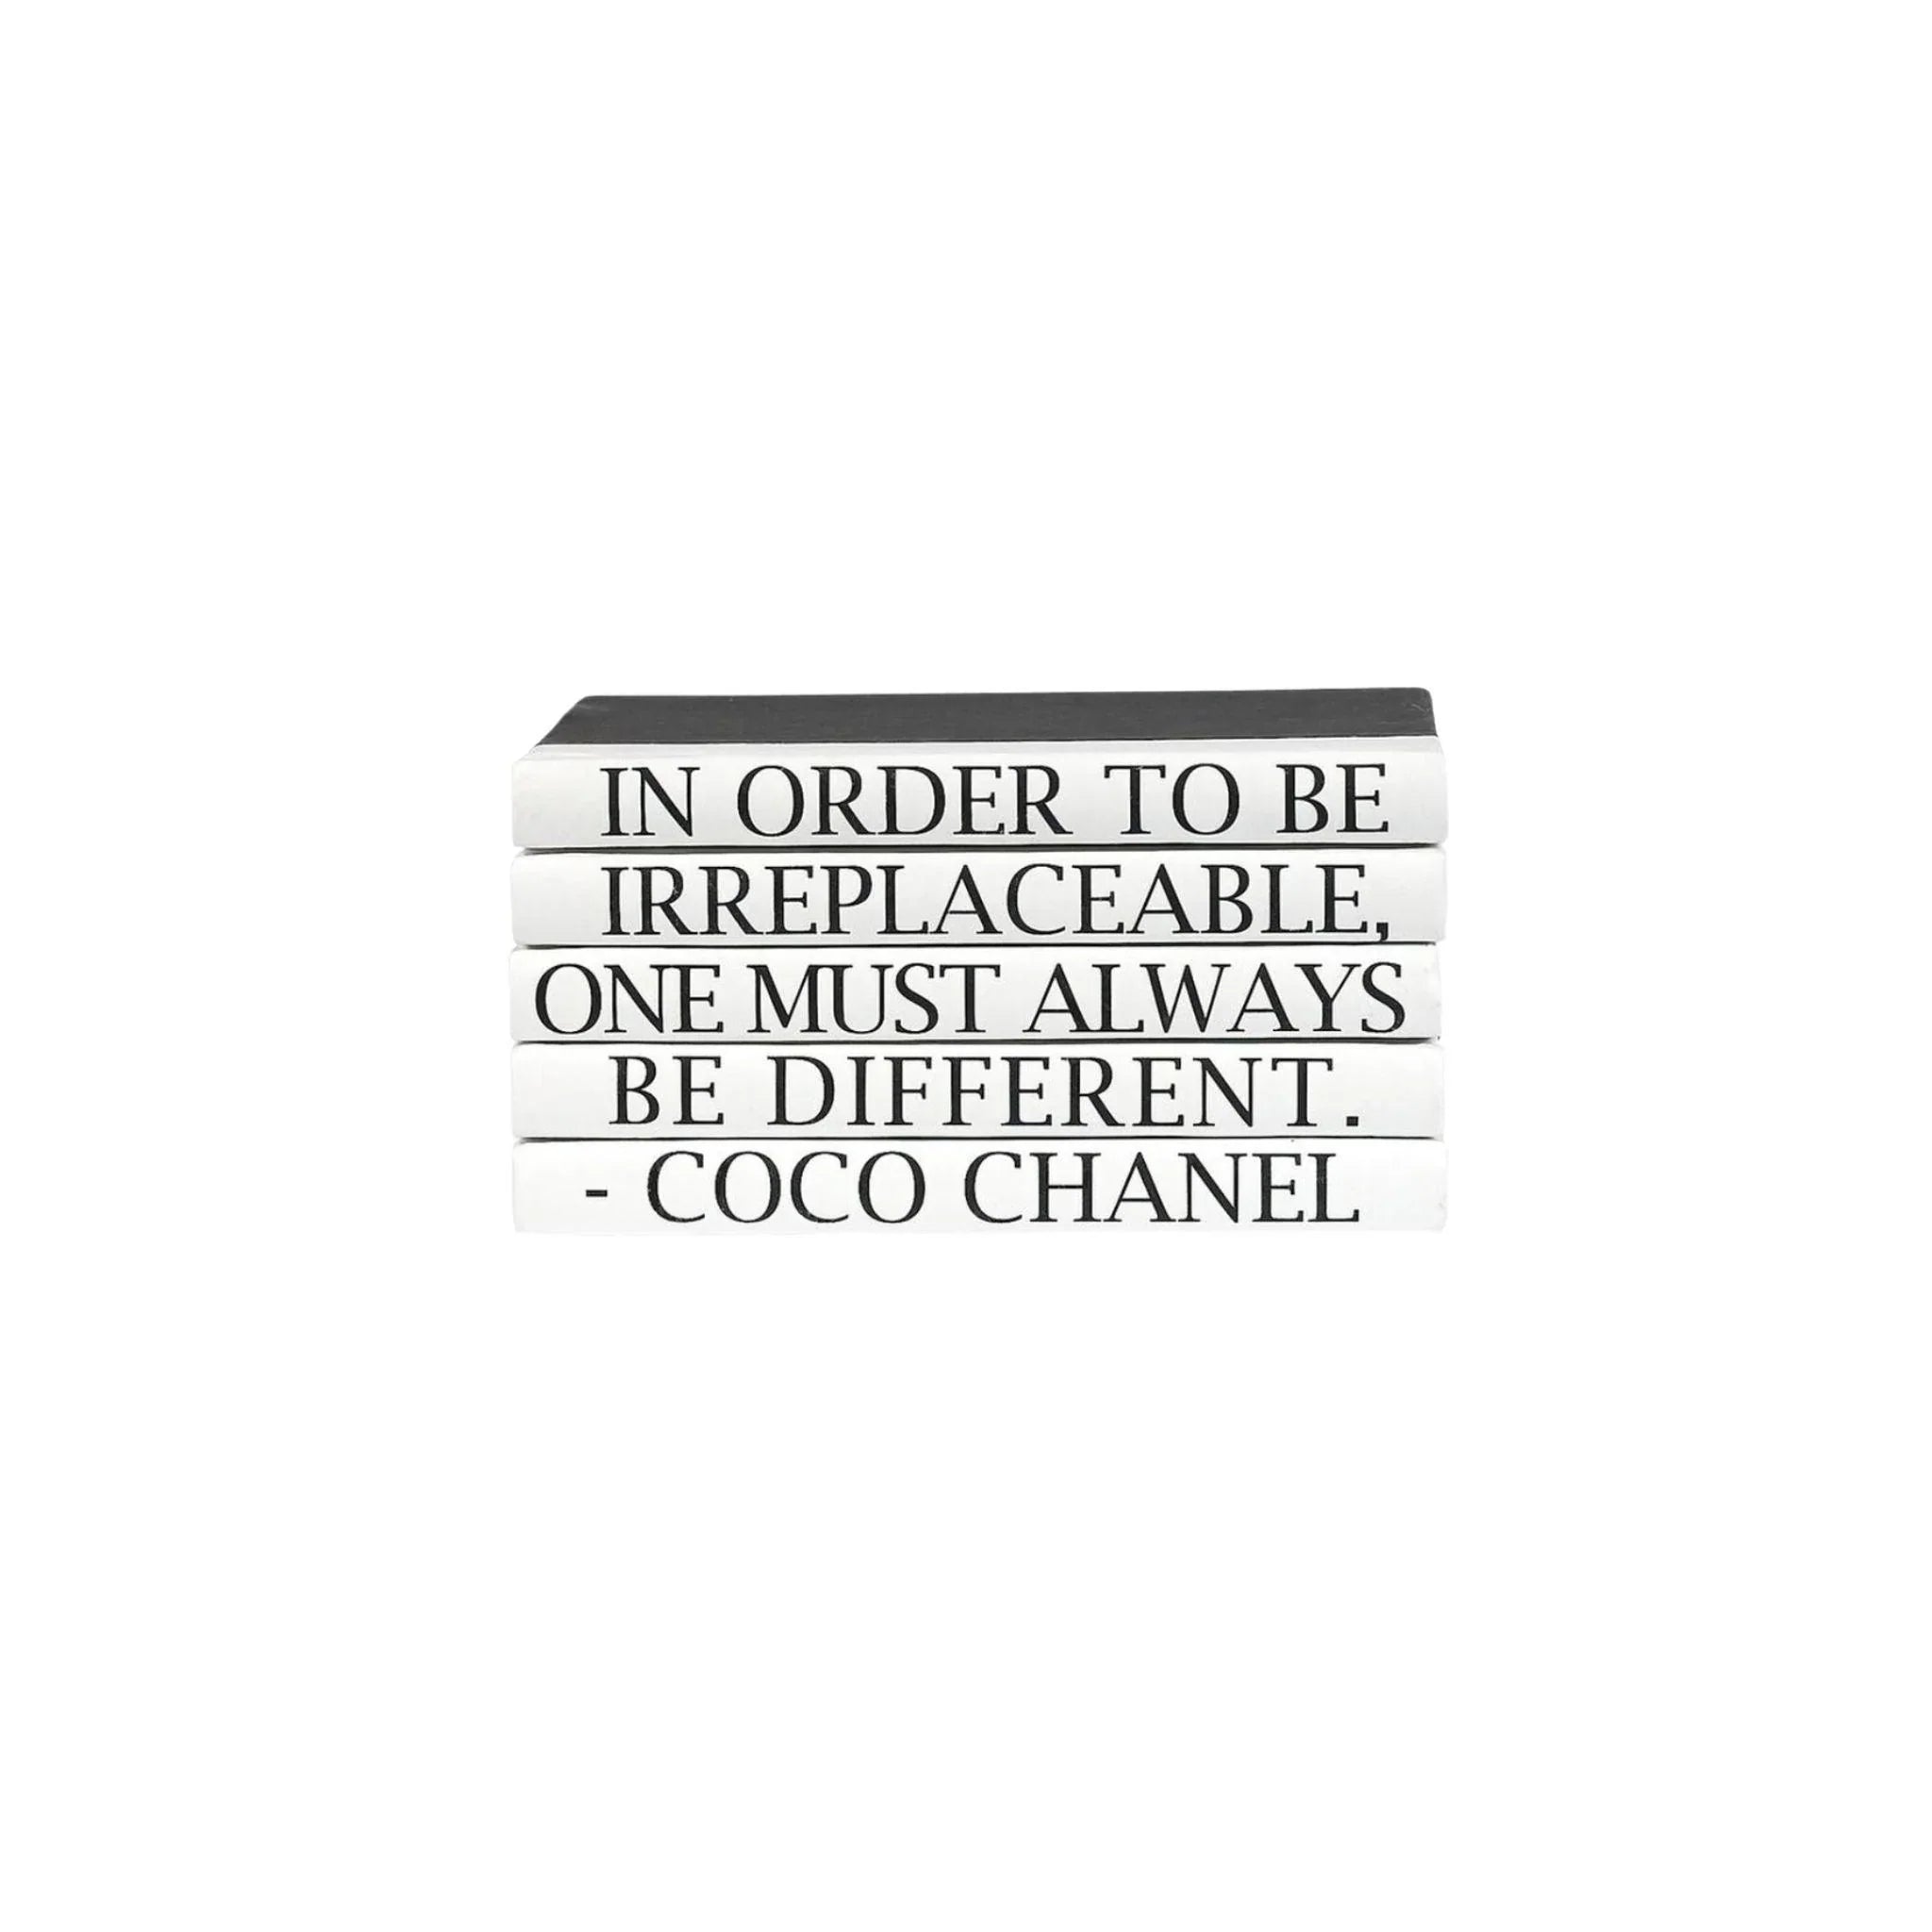 Color coco chanel quote | Poster